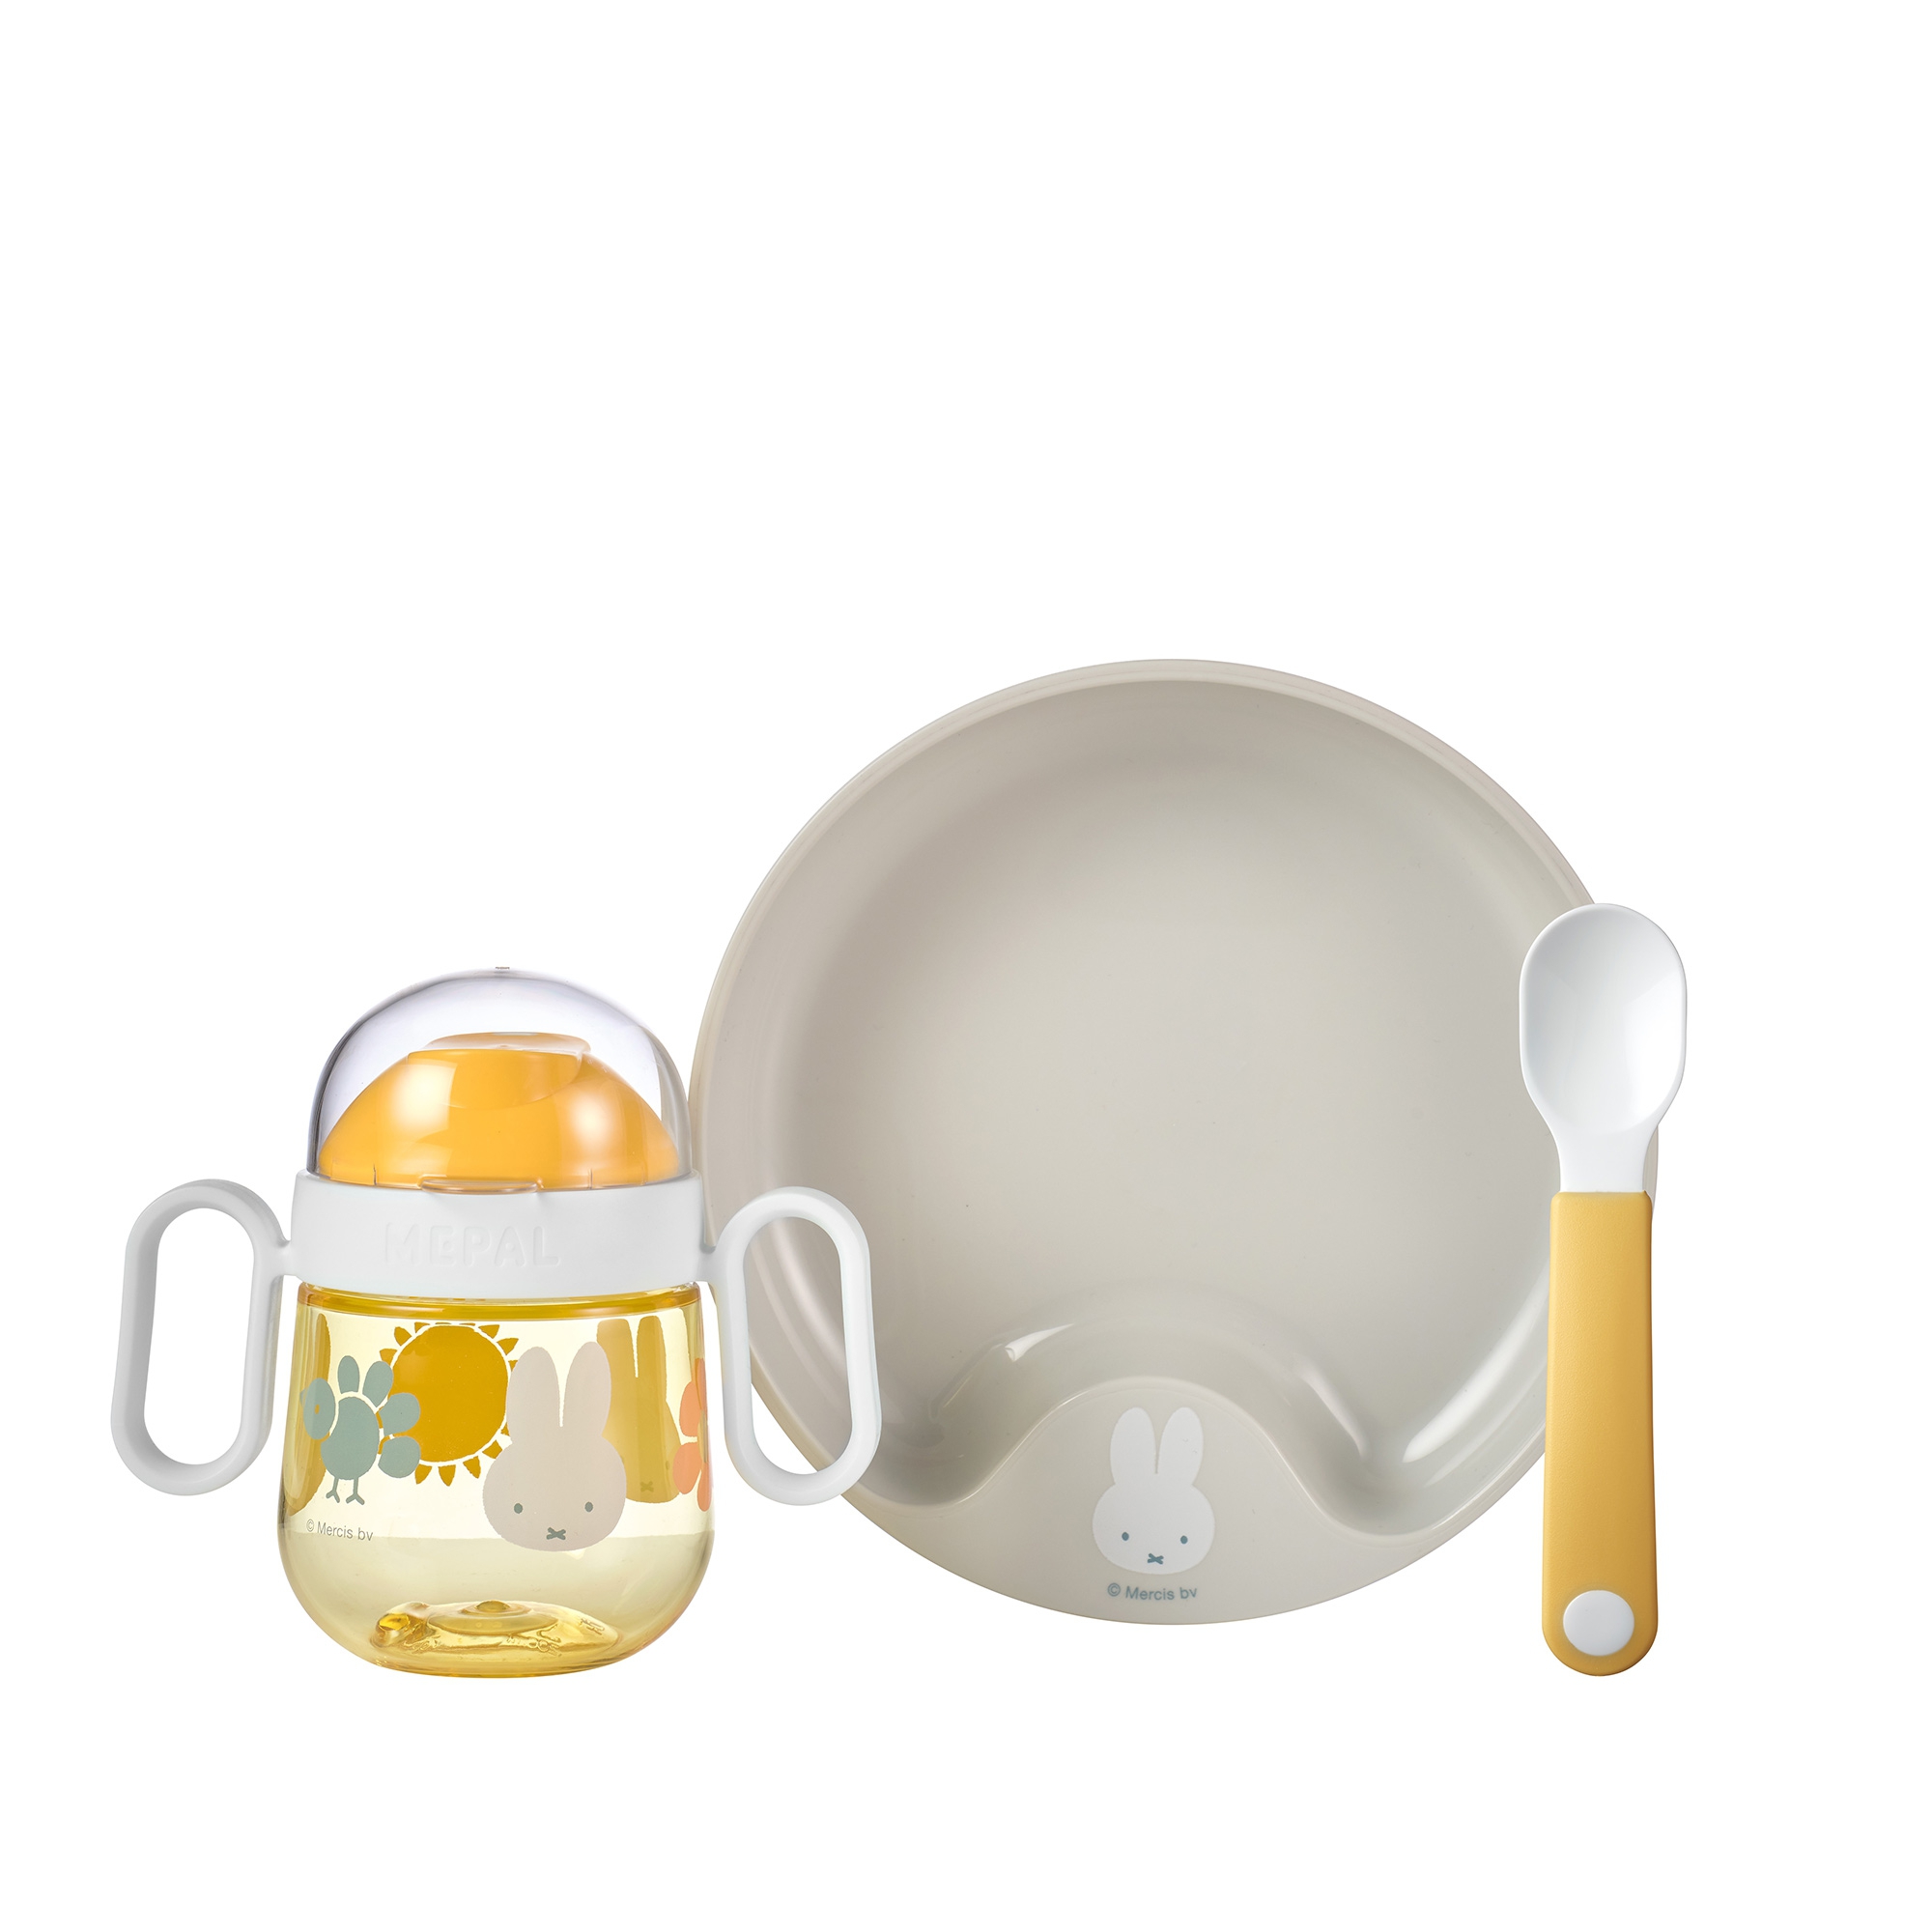 Mepal - Mio baby crockery set 3 pieces - different colors and motifs